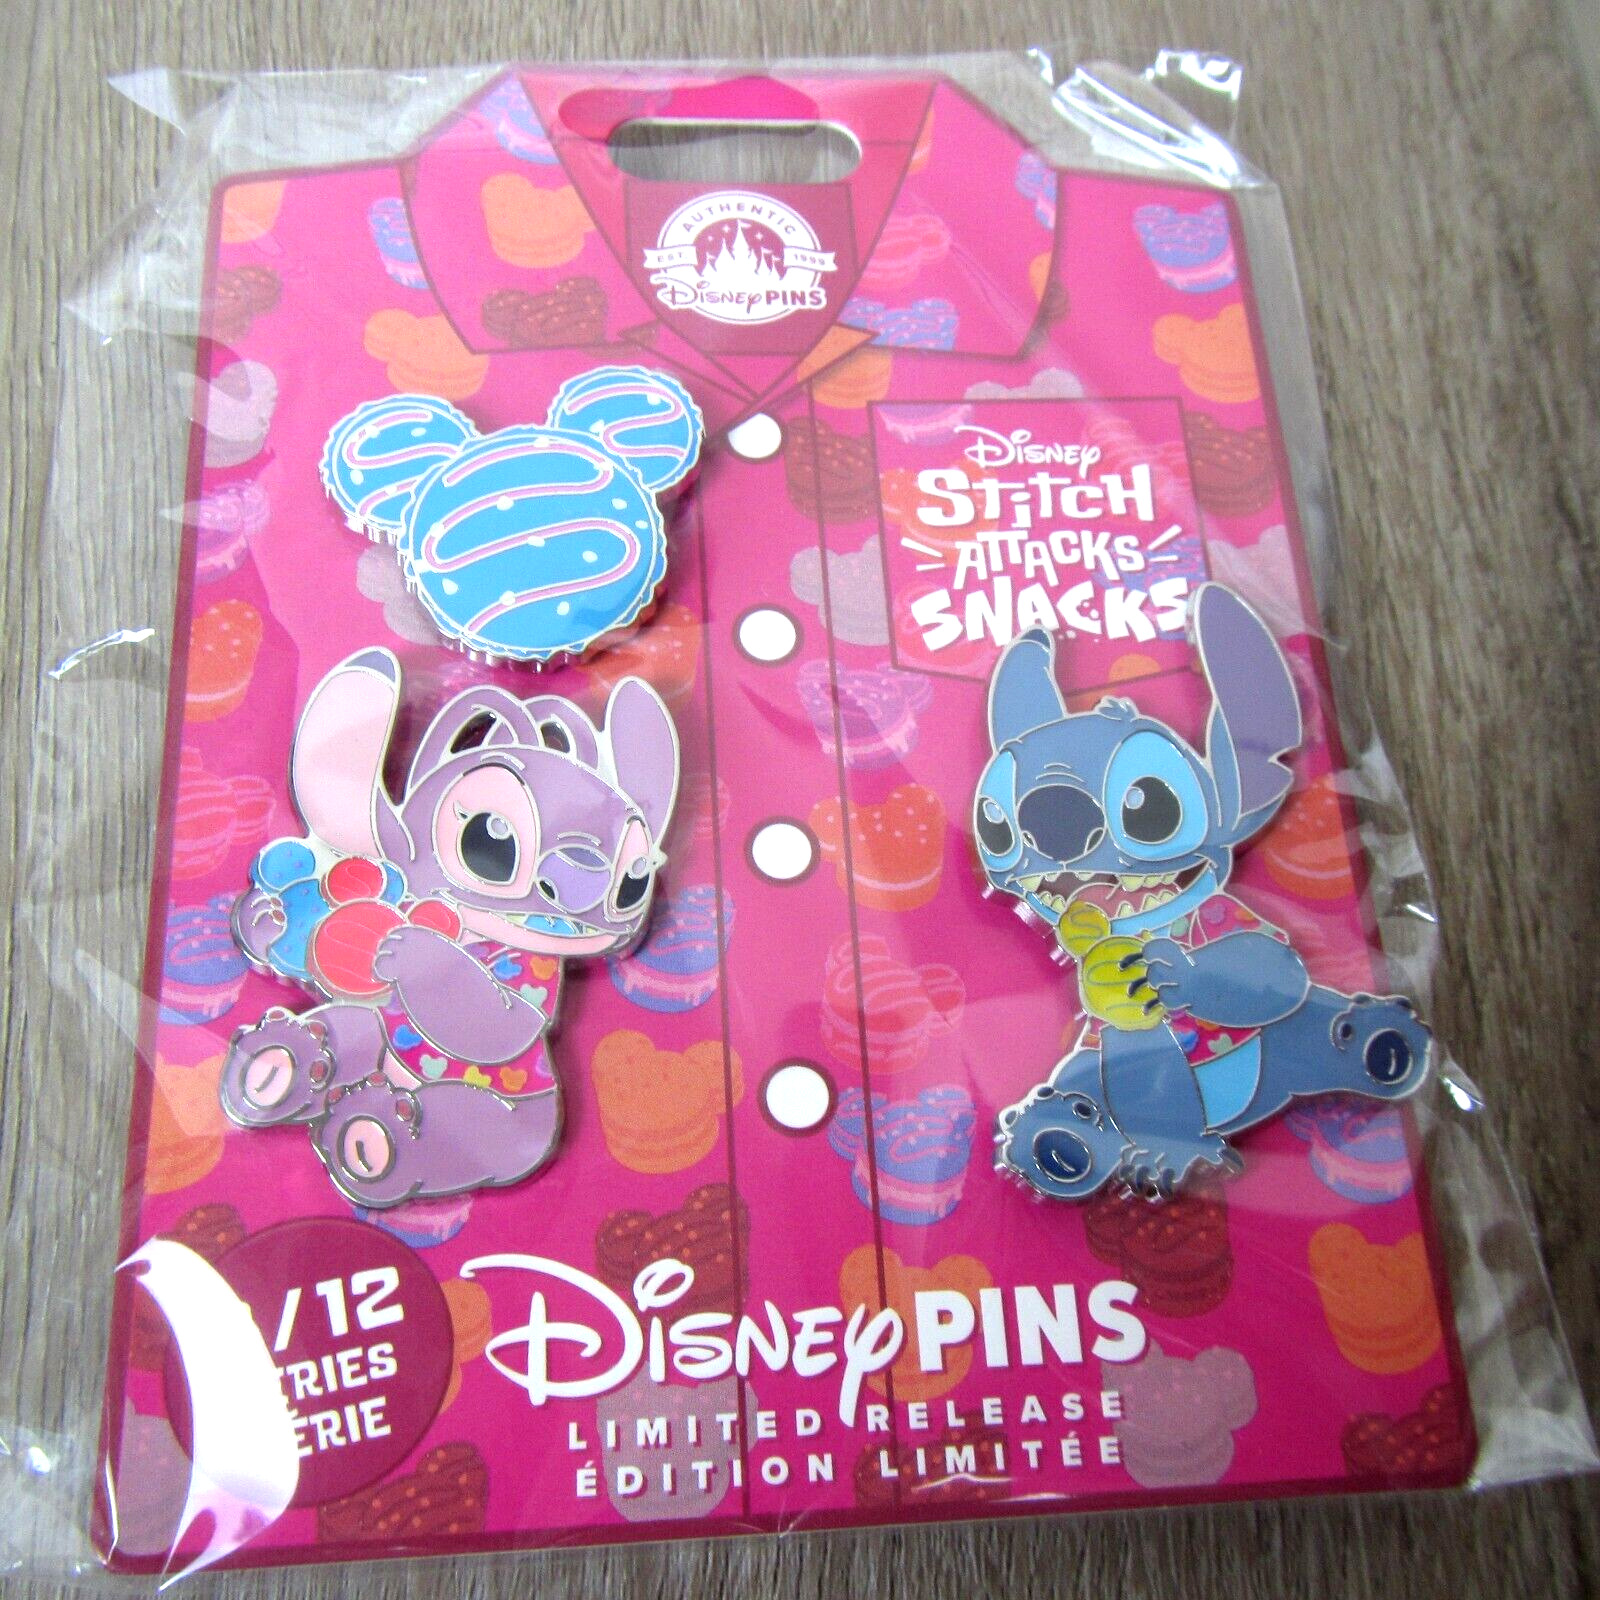 DISNEY LILO & STITCH ATTACKS SNACKS 3/12 SERIES 3 PIN SET COOKIE MARCH LIMITED 